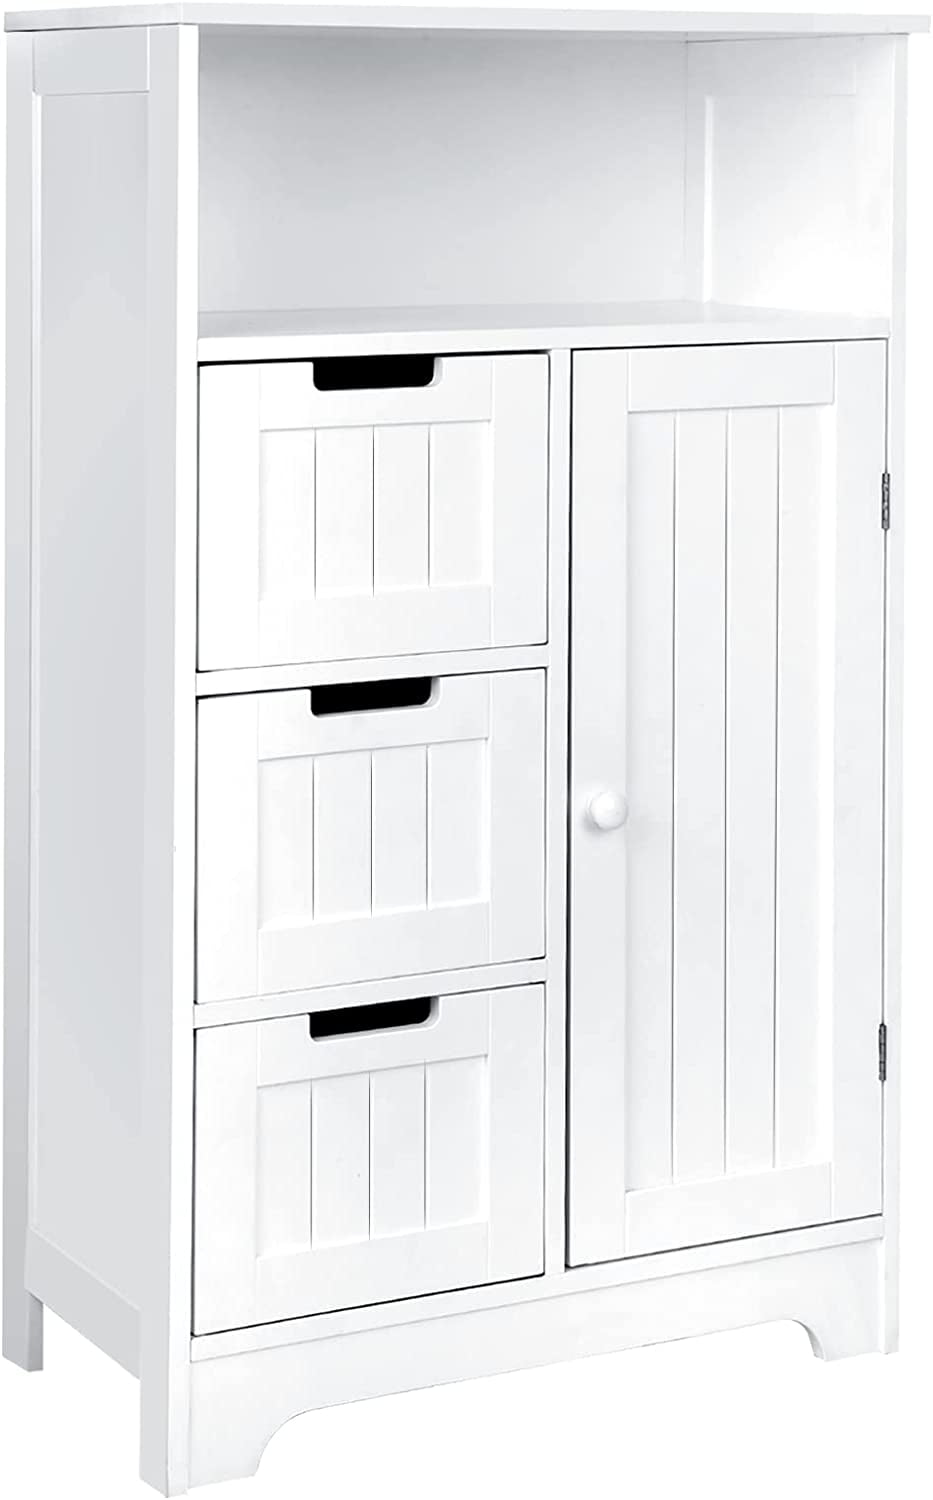 Bathroom Storage Floor Cabinet with Pull-Out Drawers and Door - White